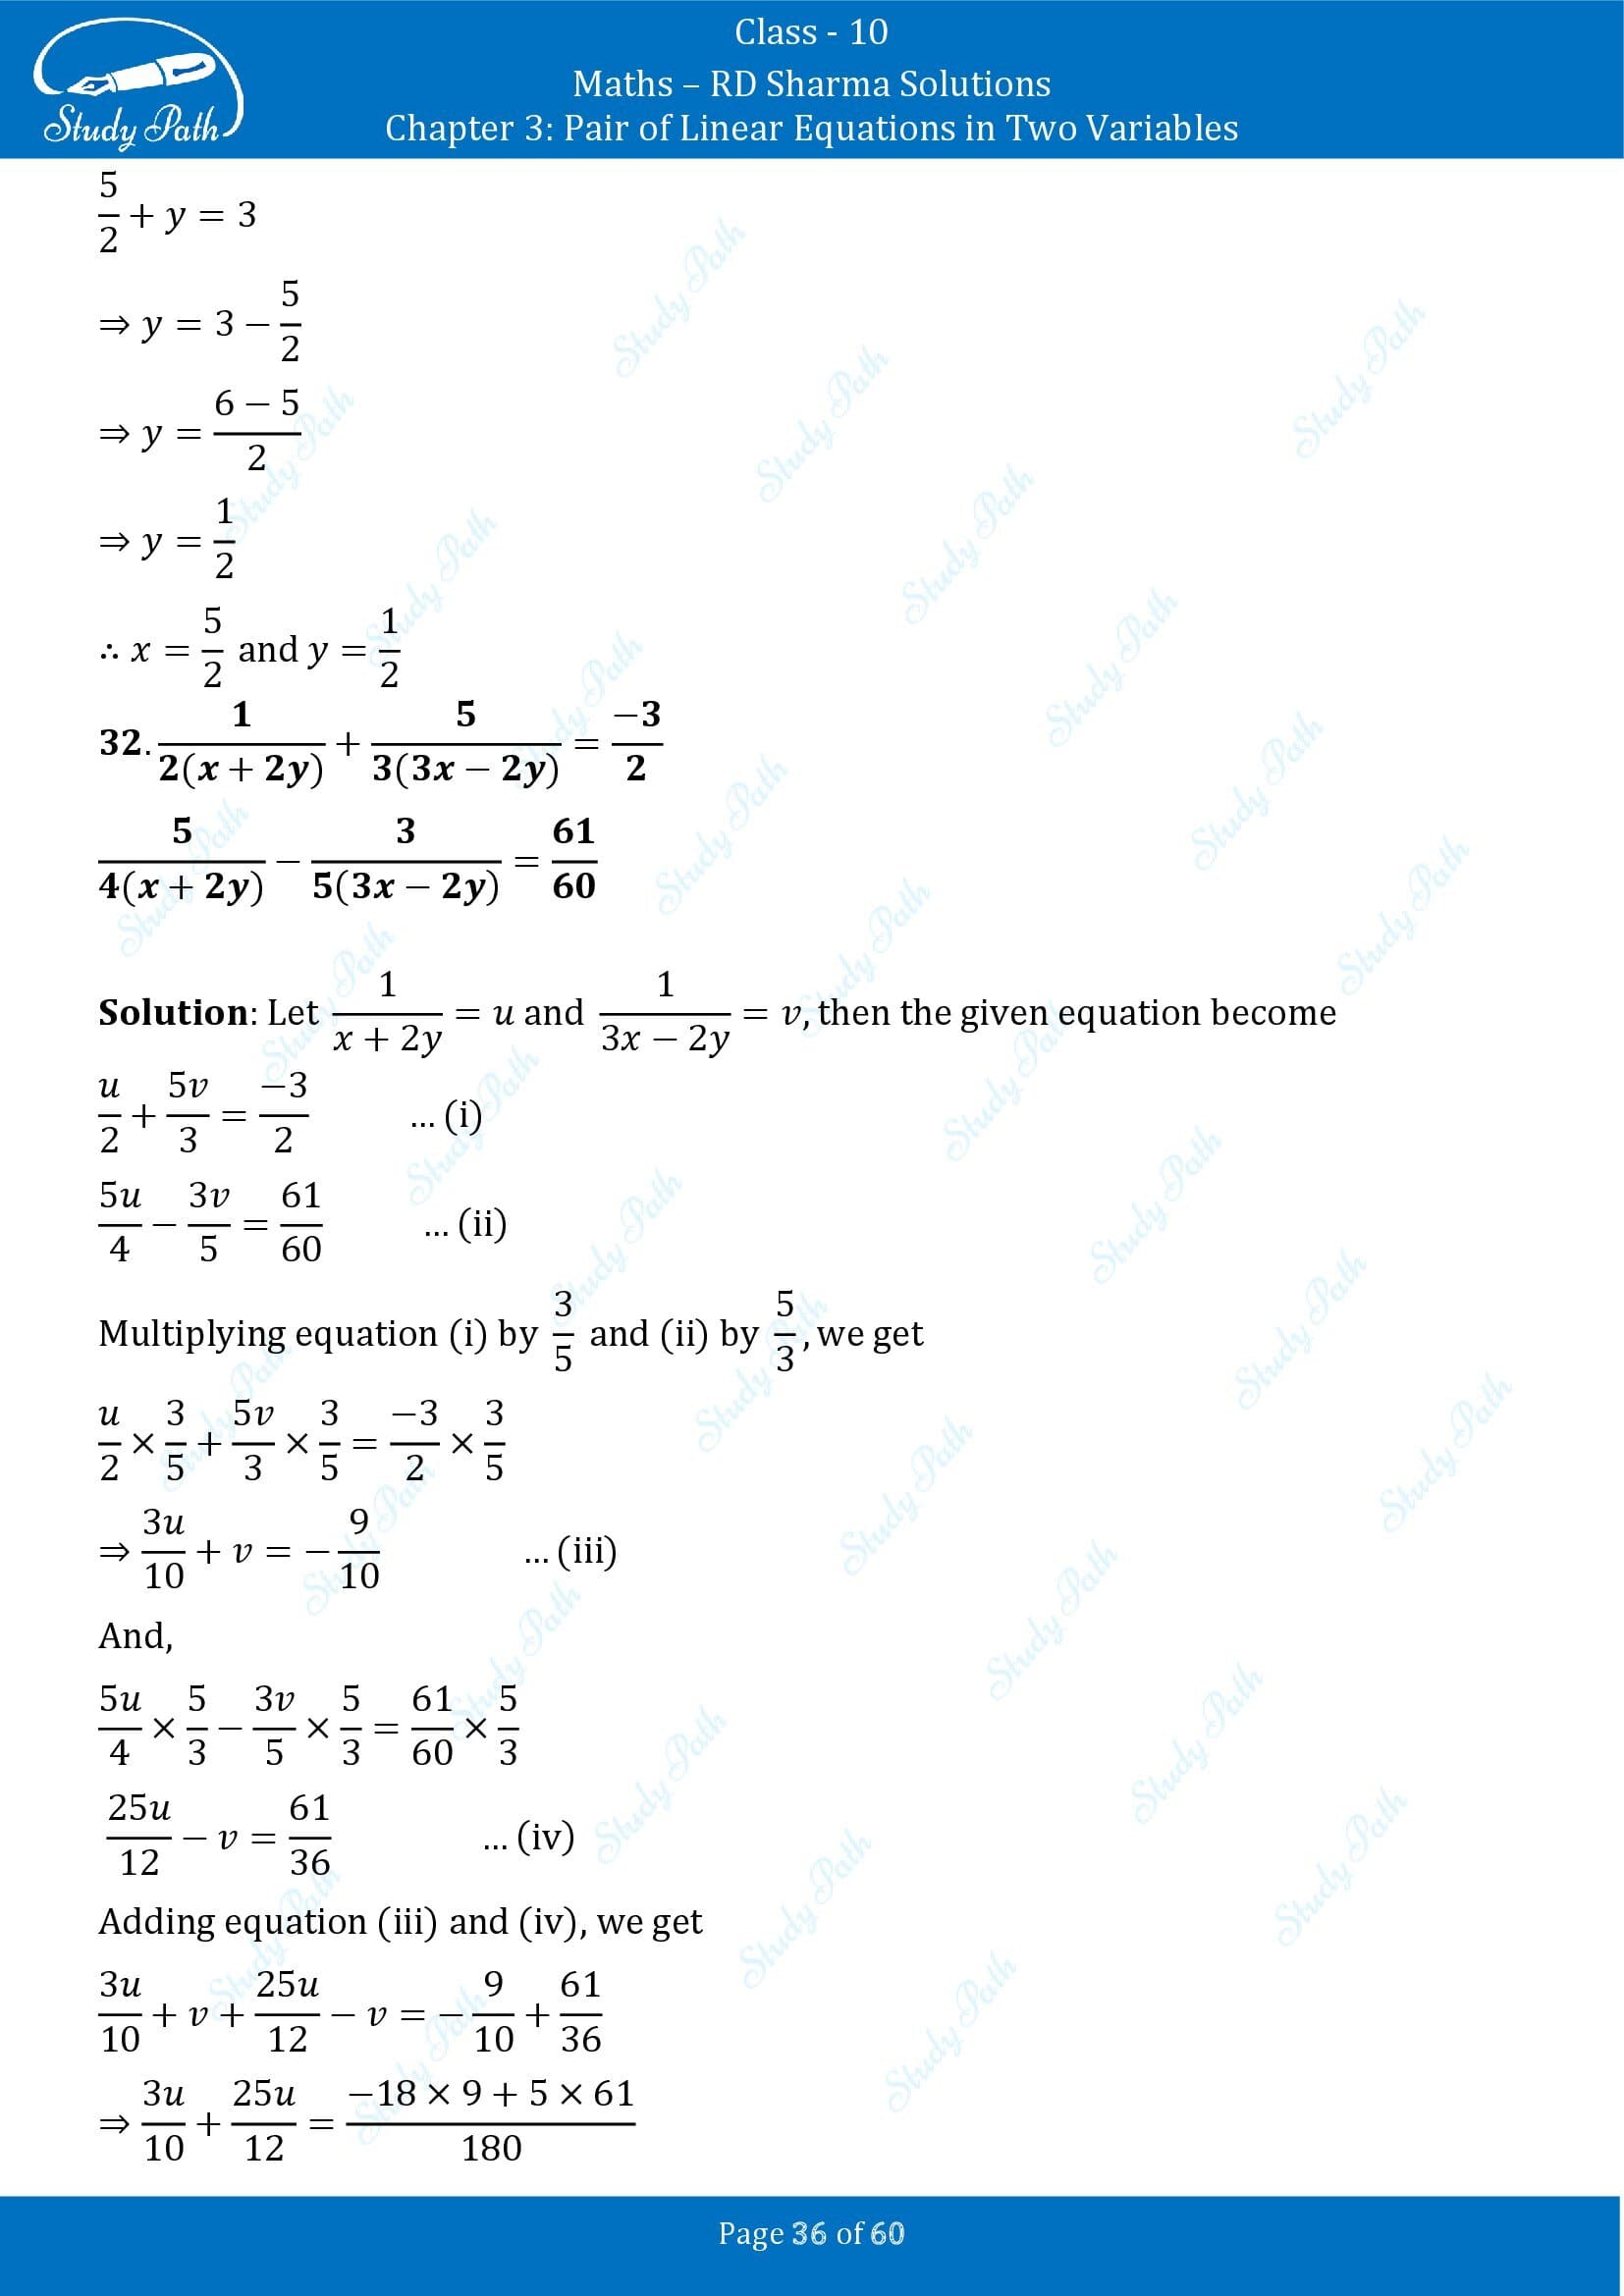 RD Sharma Solutions Class 10 Chapter 3 Pair of Linear Equations in Two Variables Exercise 3.3 00036